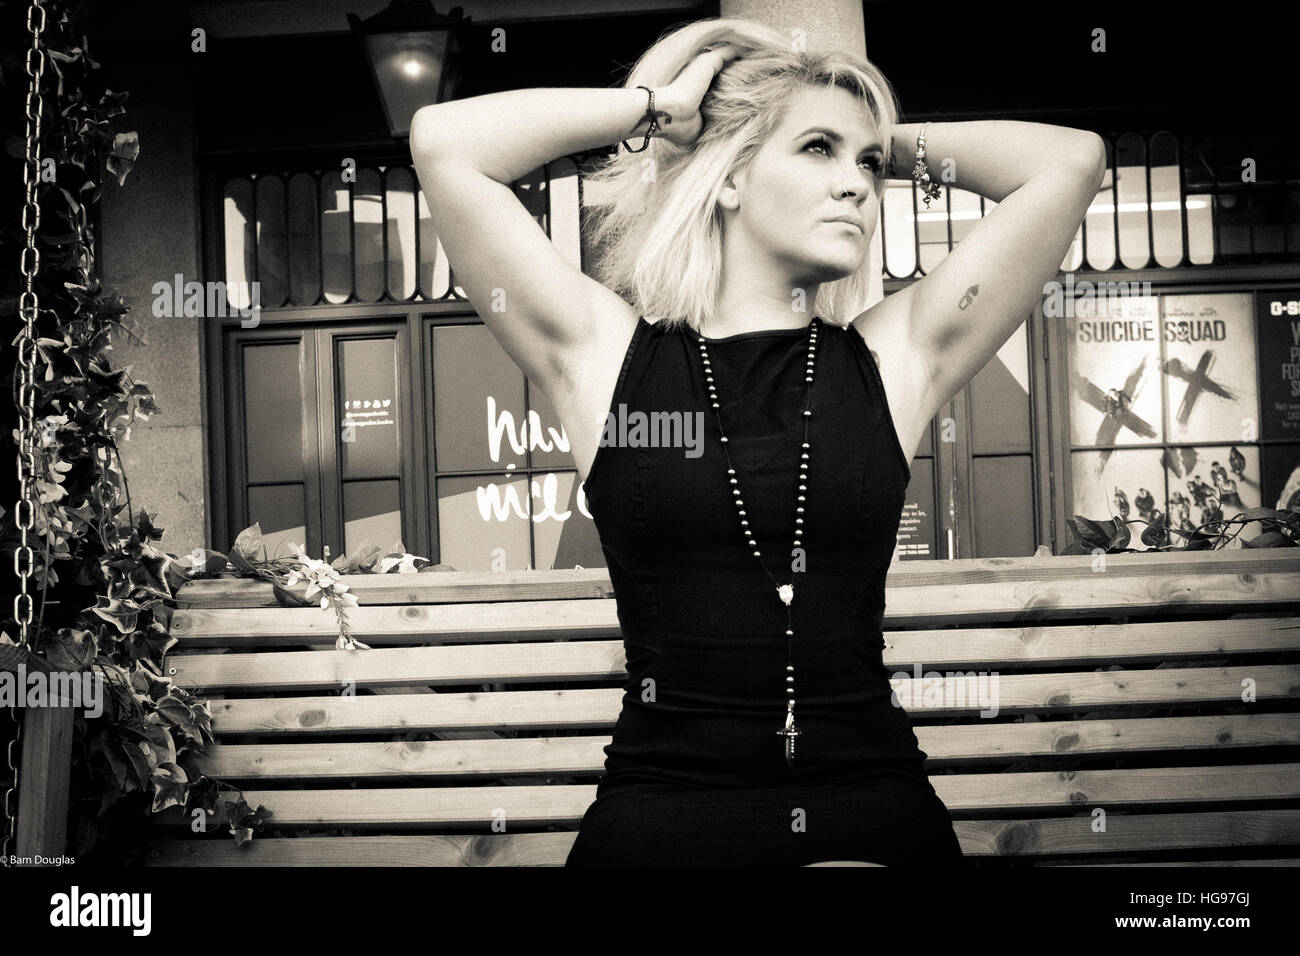 Blonde model poses on bench wearing black dress and Gothic cross Stock Photo